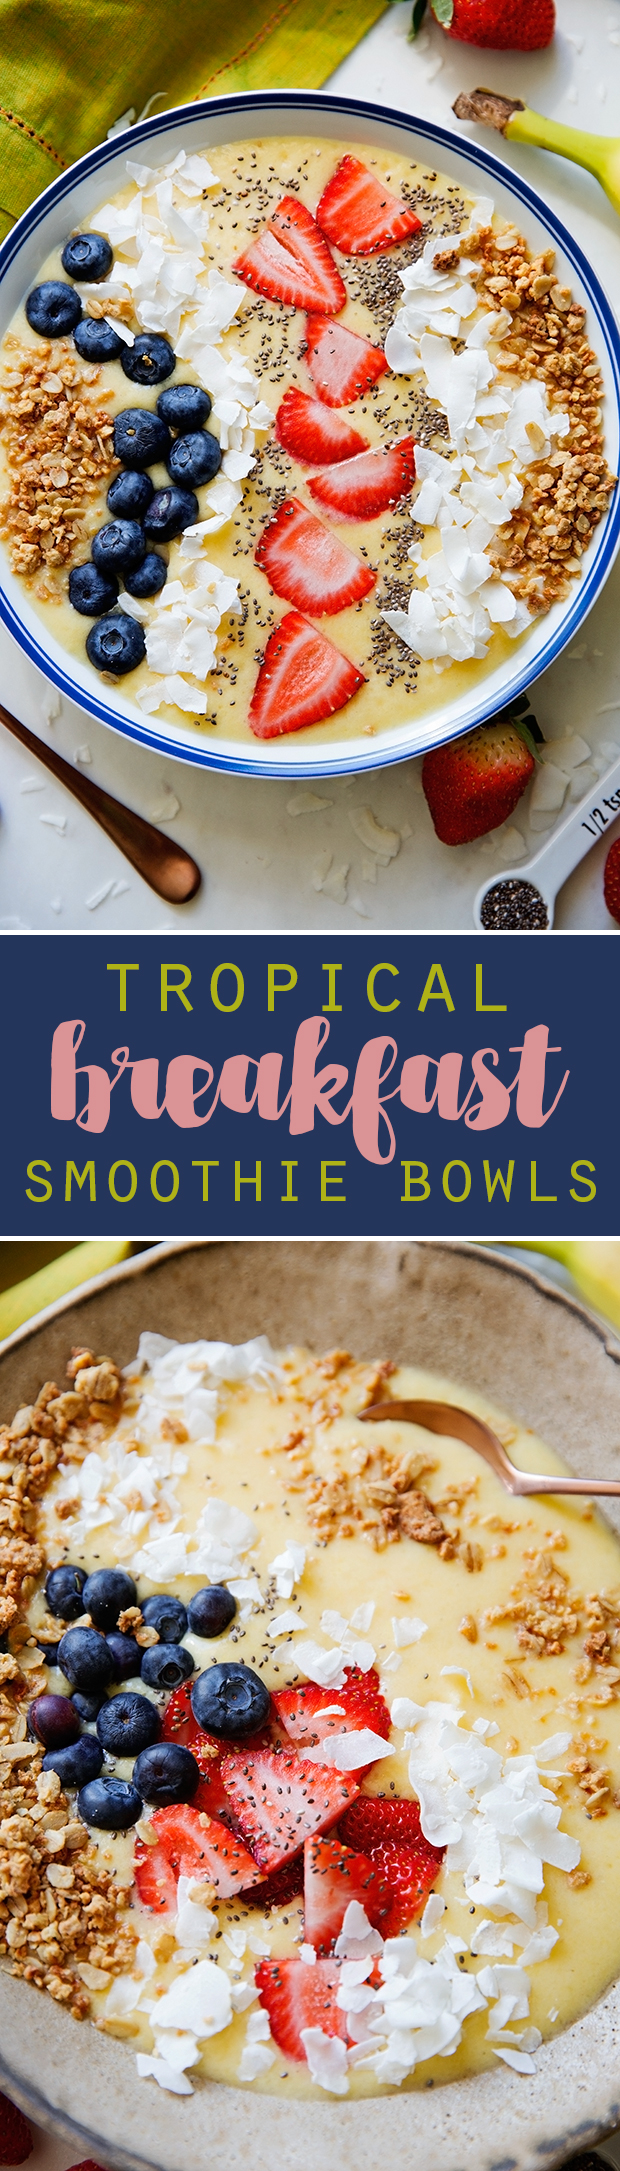 Tropical Breakfast Smoothie Bowls - Loaded with nutrition and easy to make! #smoothie #smoothiebowl #tropicalsmoothie | Littlespicejar.com